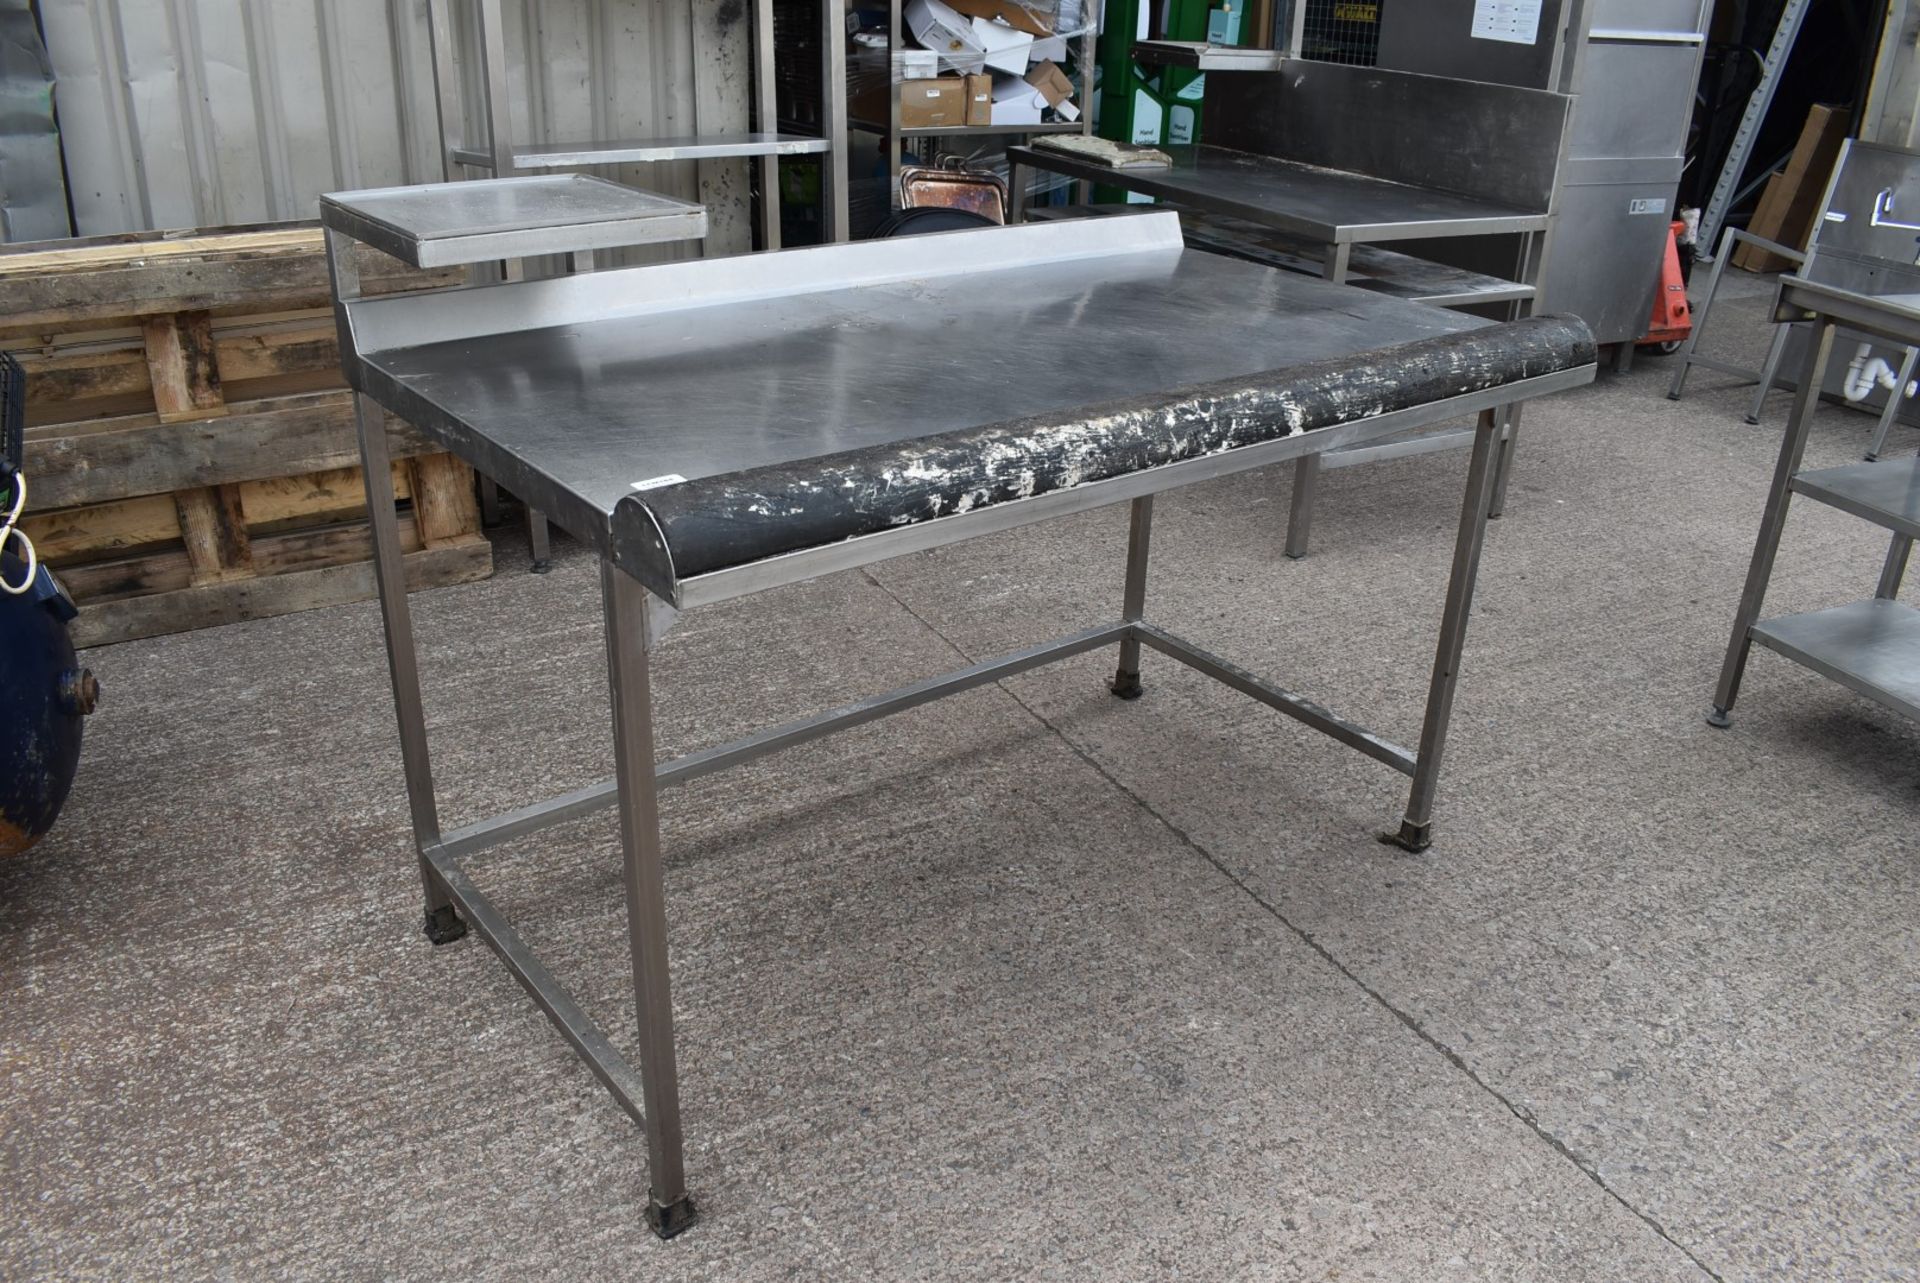 1 x Stainless Steel Workstation With Monitor / Printer Shelf - Dimensions: H92 x W150 x D90 cms - Image 2 of 6